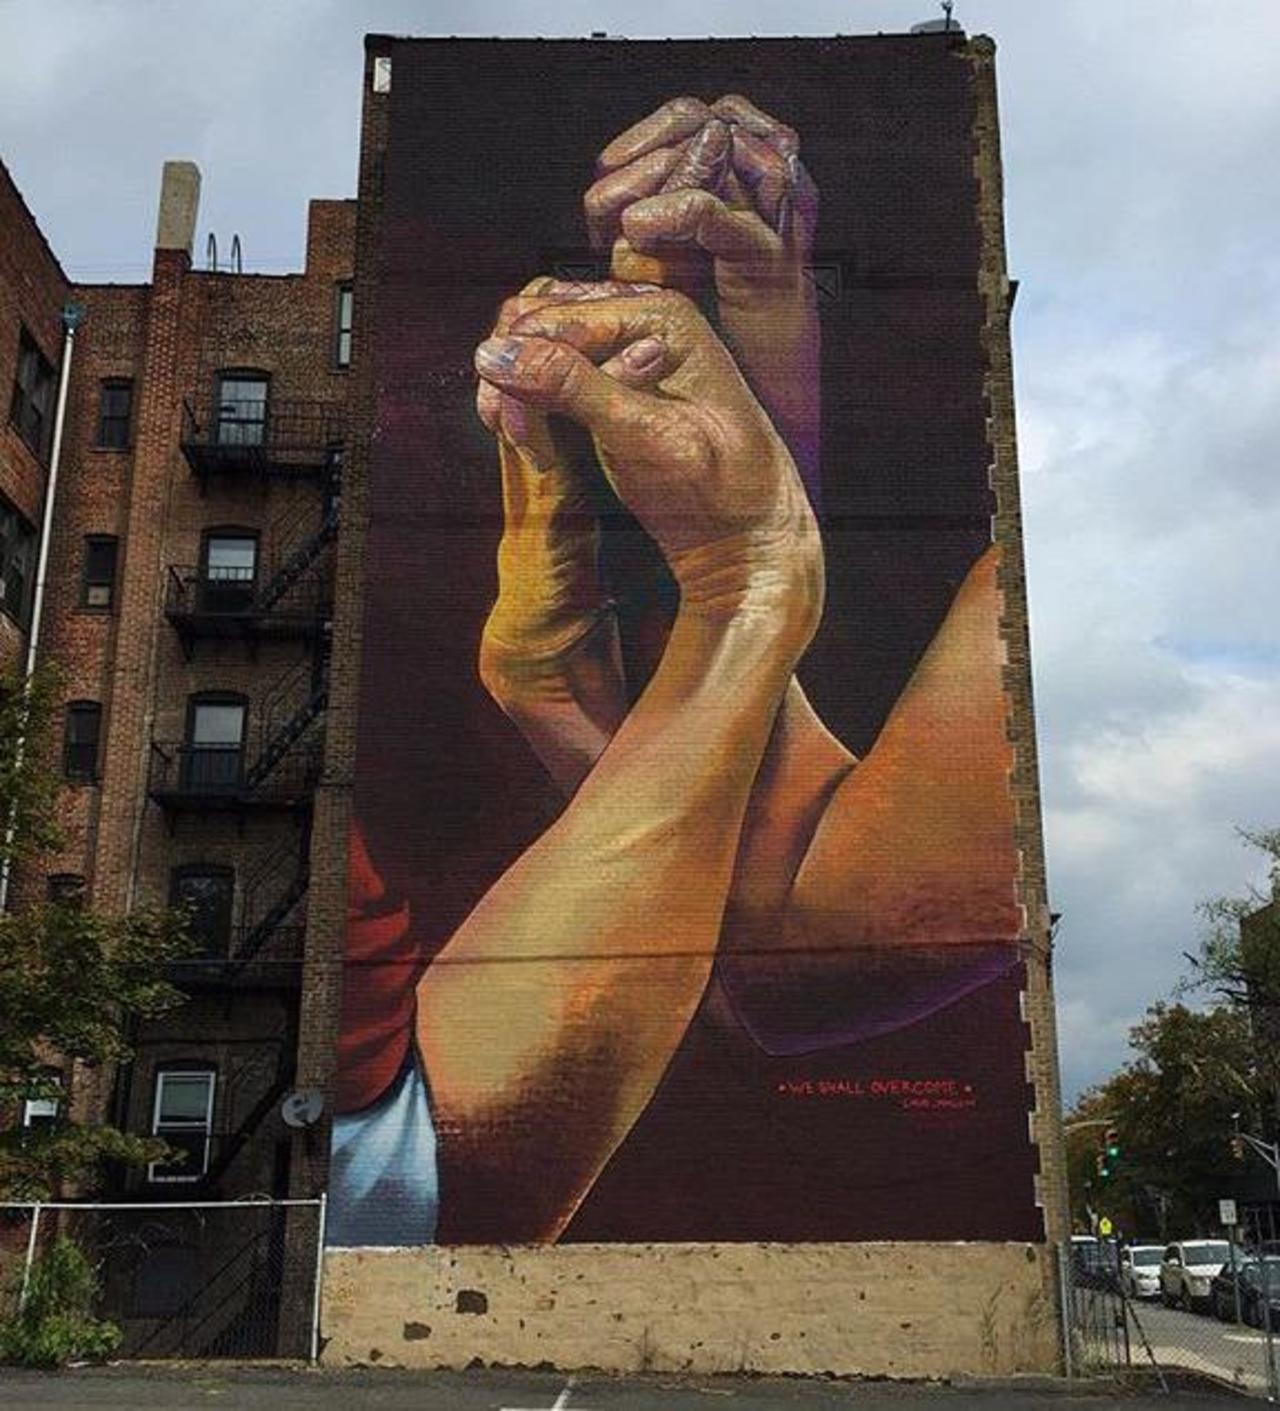 New Street Art by CaseMaclaim in Jersey City for the TheBKcollective 

#art #graffiti #mural #streetart http://t.co/SuYJ22lXDc